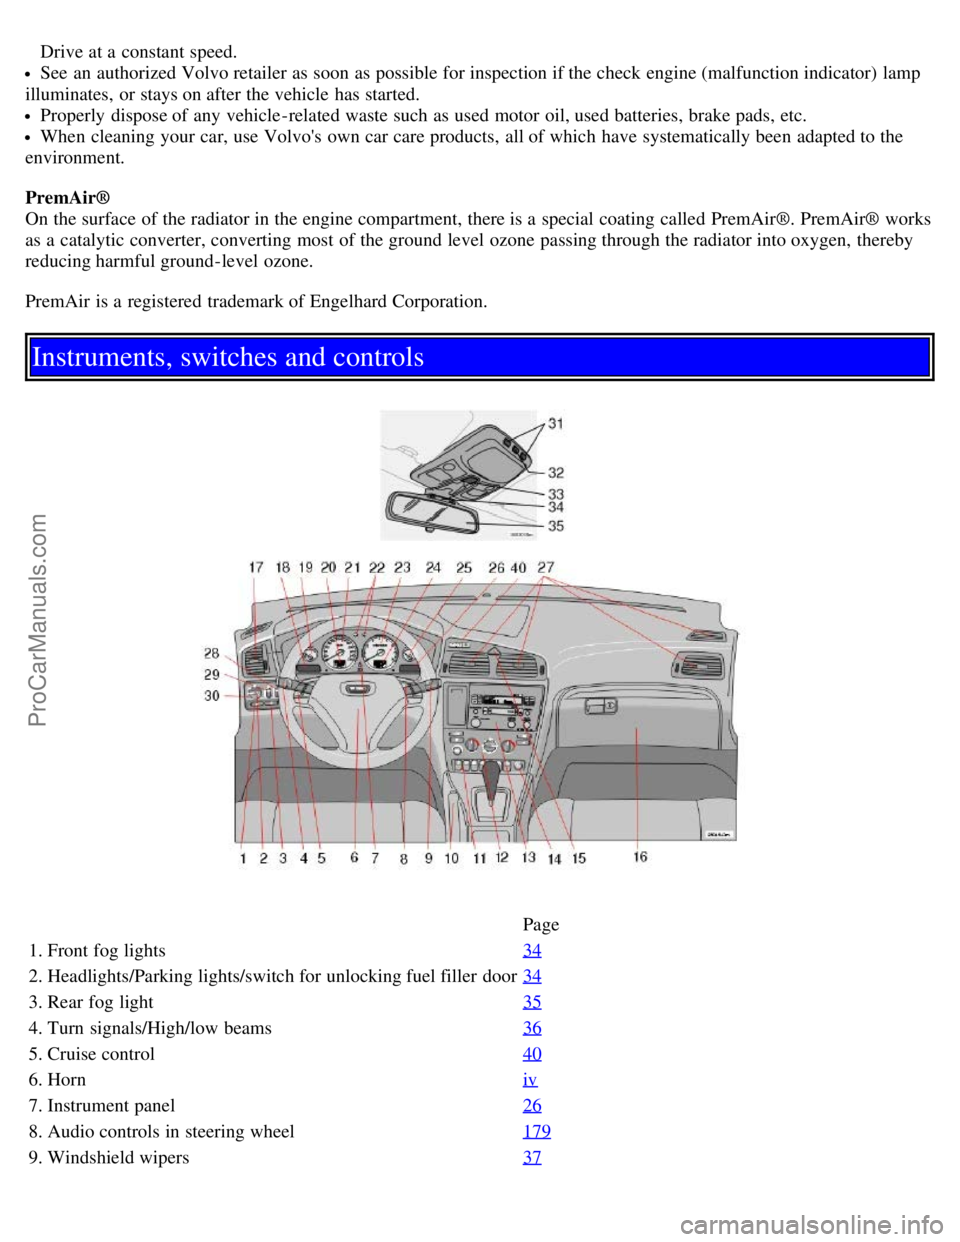 VOLVO S60 2005  Owners Manual Drive at a  constant speed.
See  an  authorized Volvo retailer as soon as possible for inspection if the check engine (malfunction indicator) lamp
illuminates,  or stays on after the vehicle has start